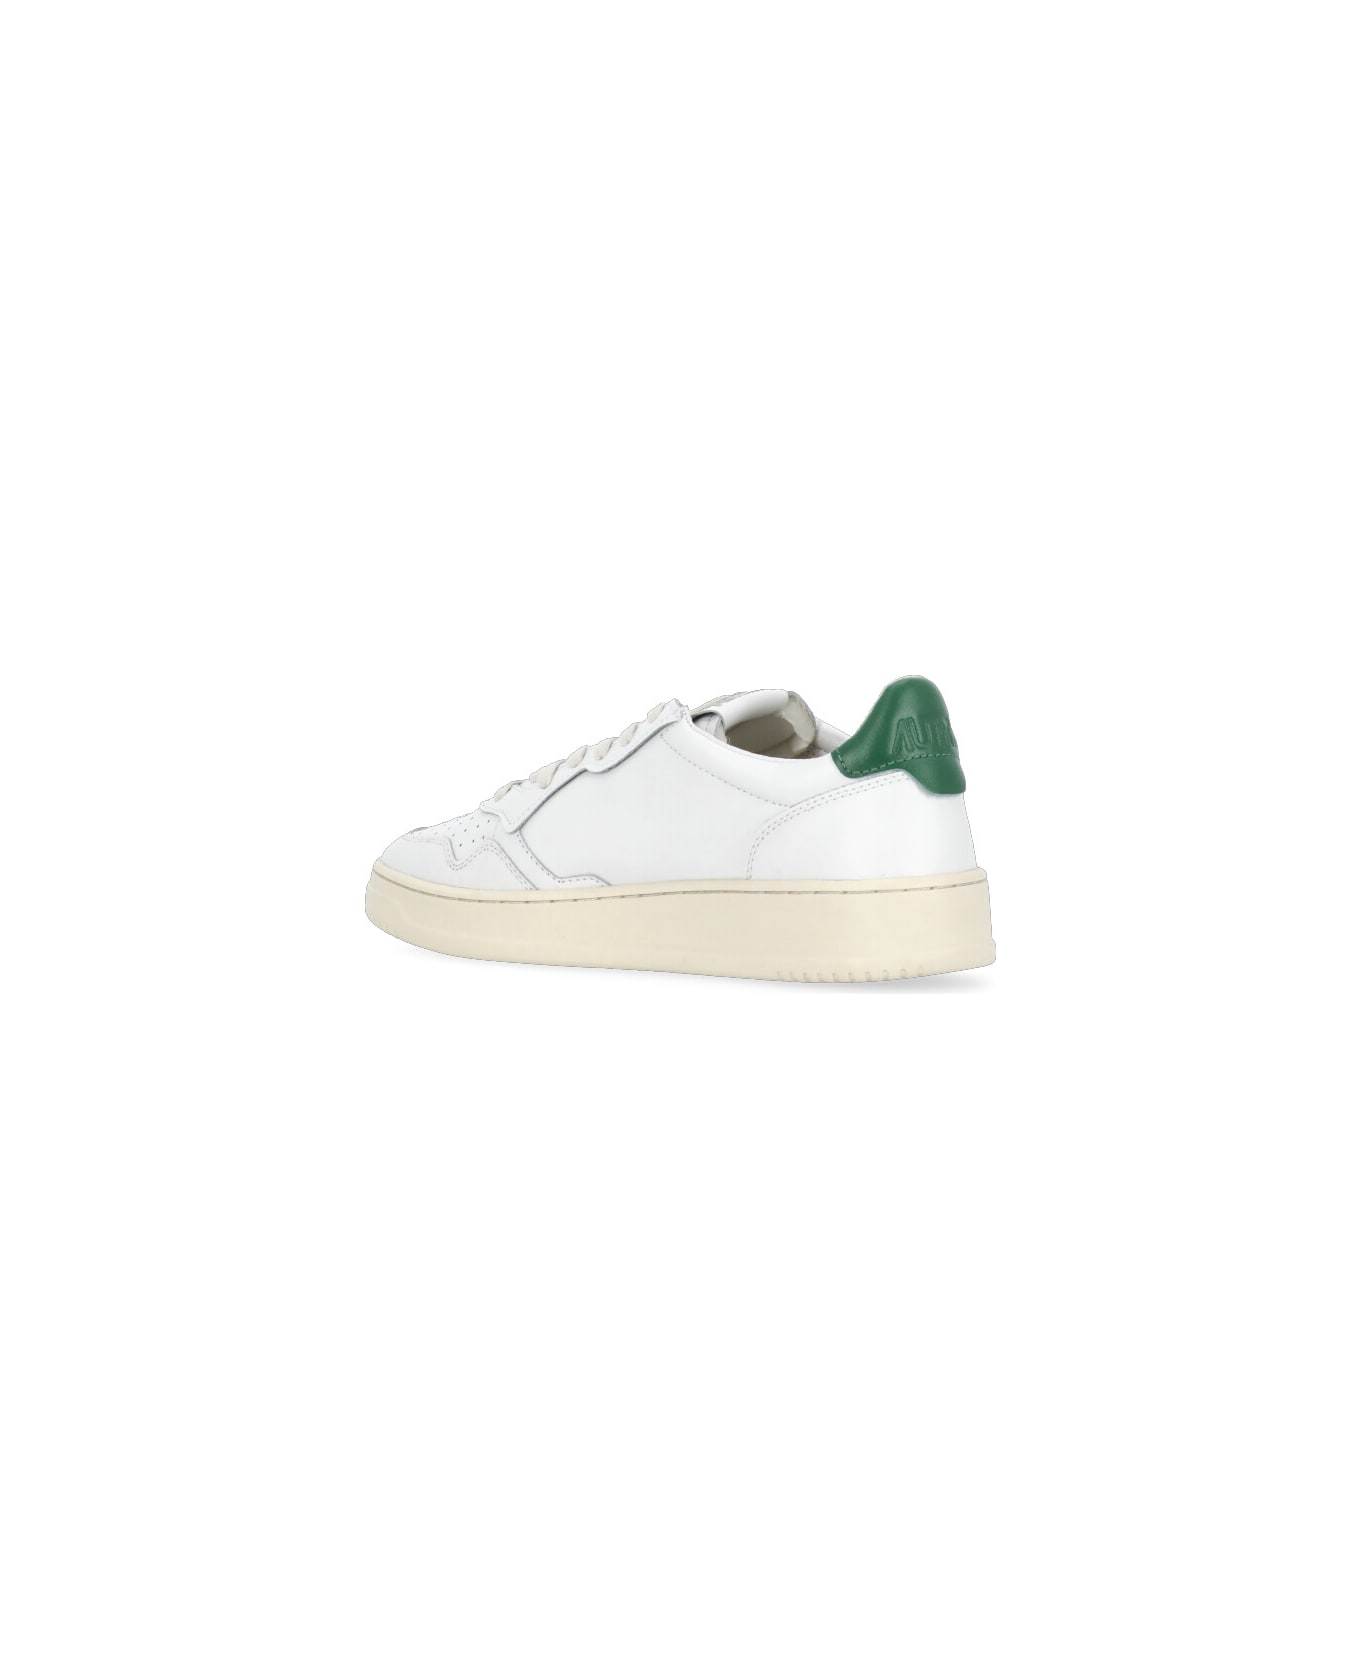 Autry Aulm Ll20 Sneakers - White